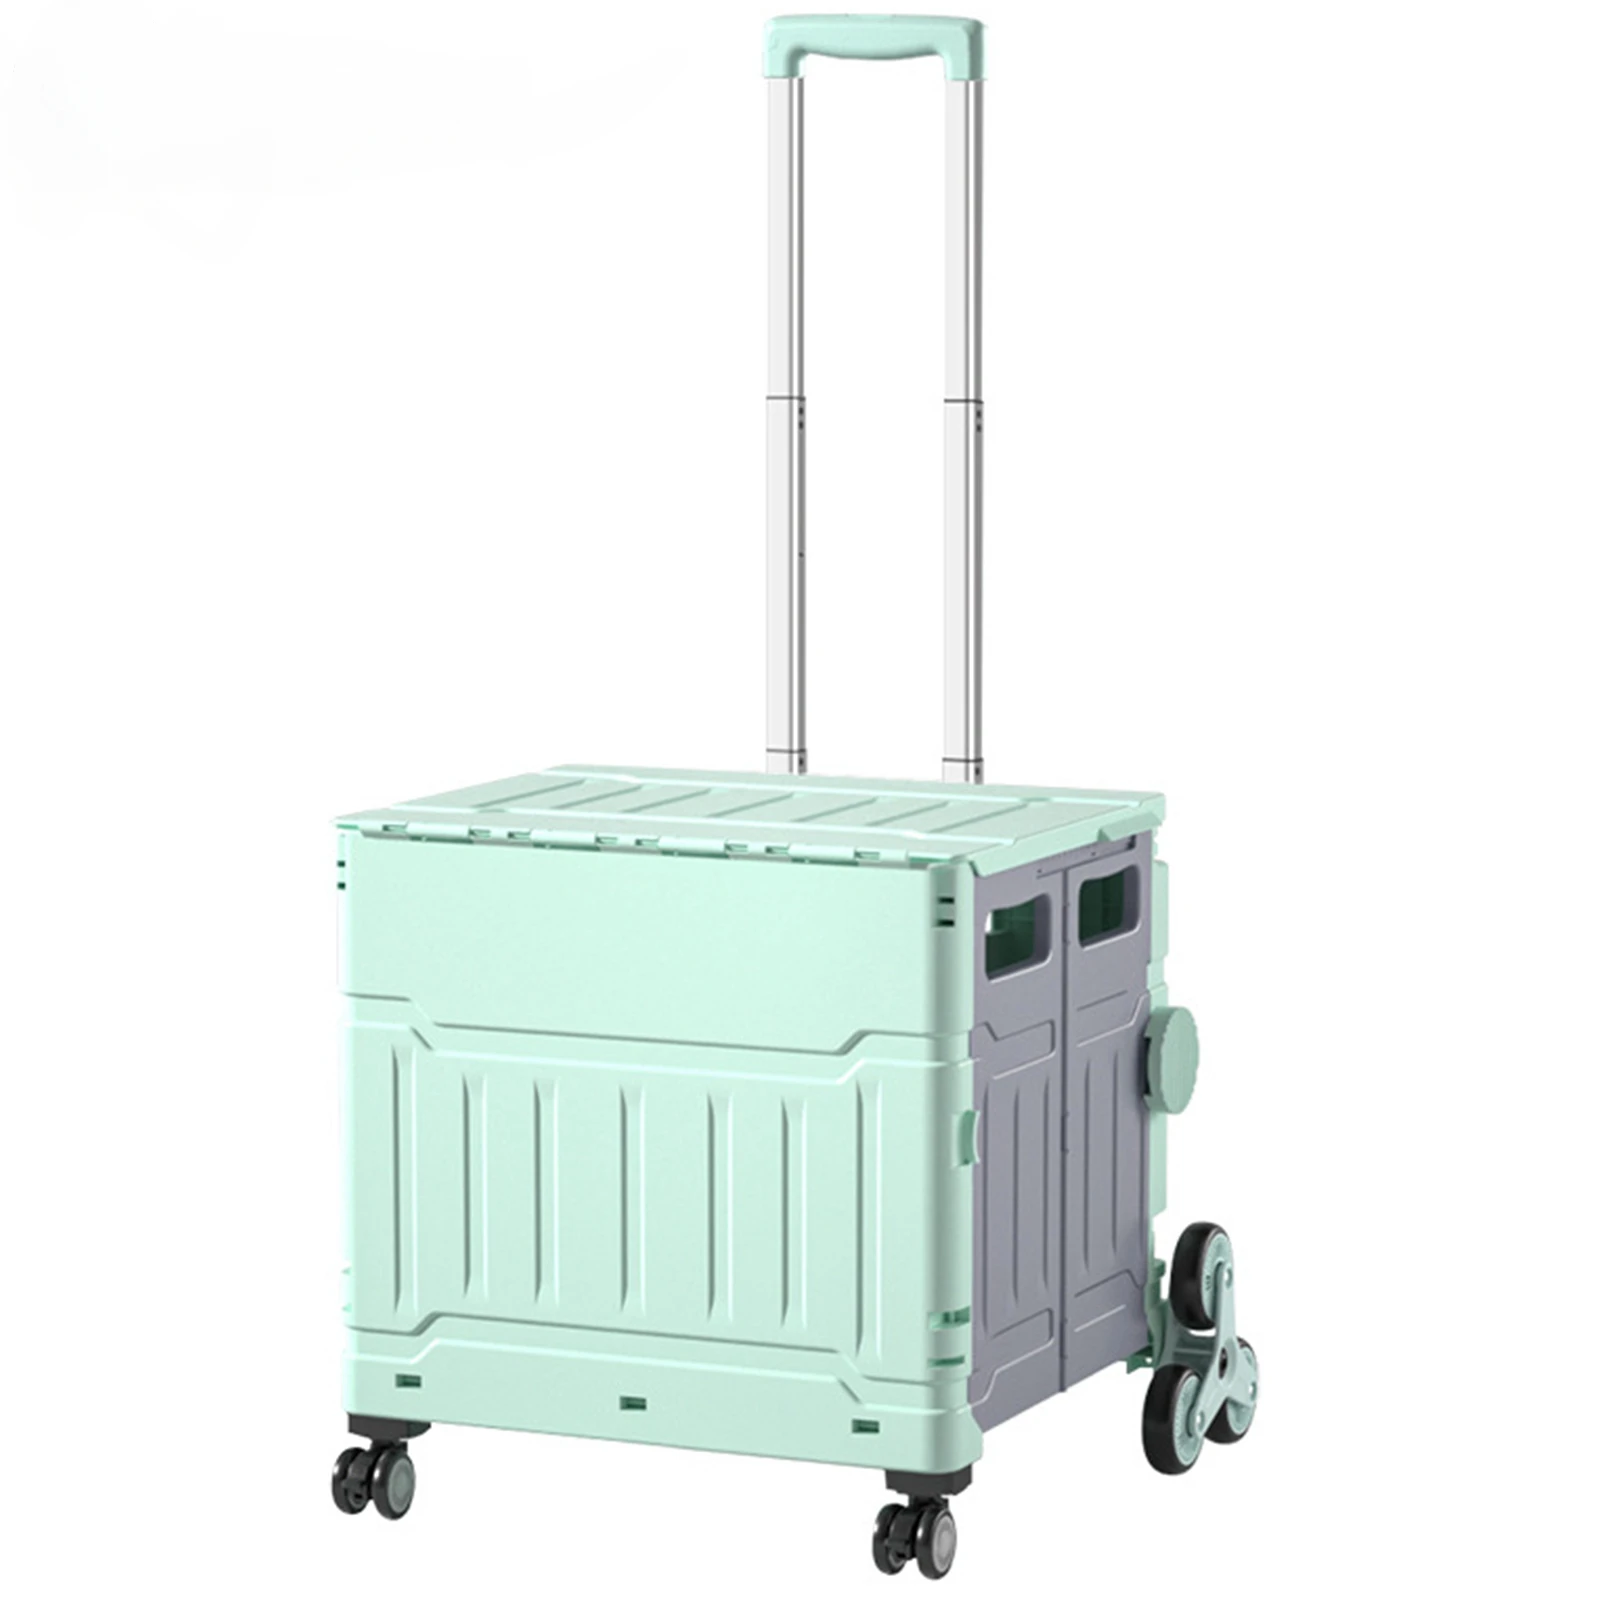 50L-Large-Capacity-Folding-The-Folding-Shopping-Cart-Trolley-The-Outdoor-Vehicle-Home-Uses-The-Courier-1